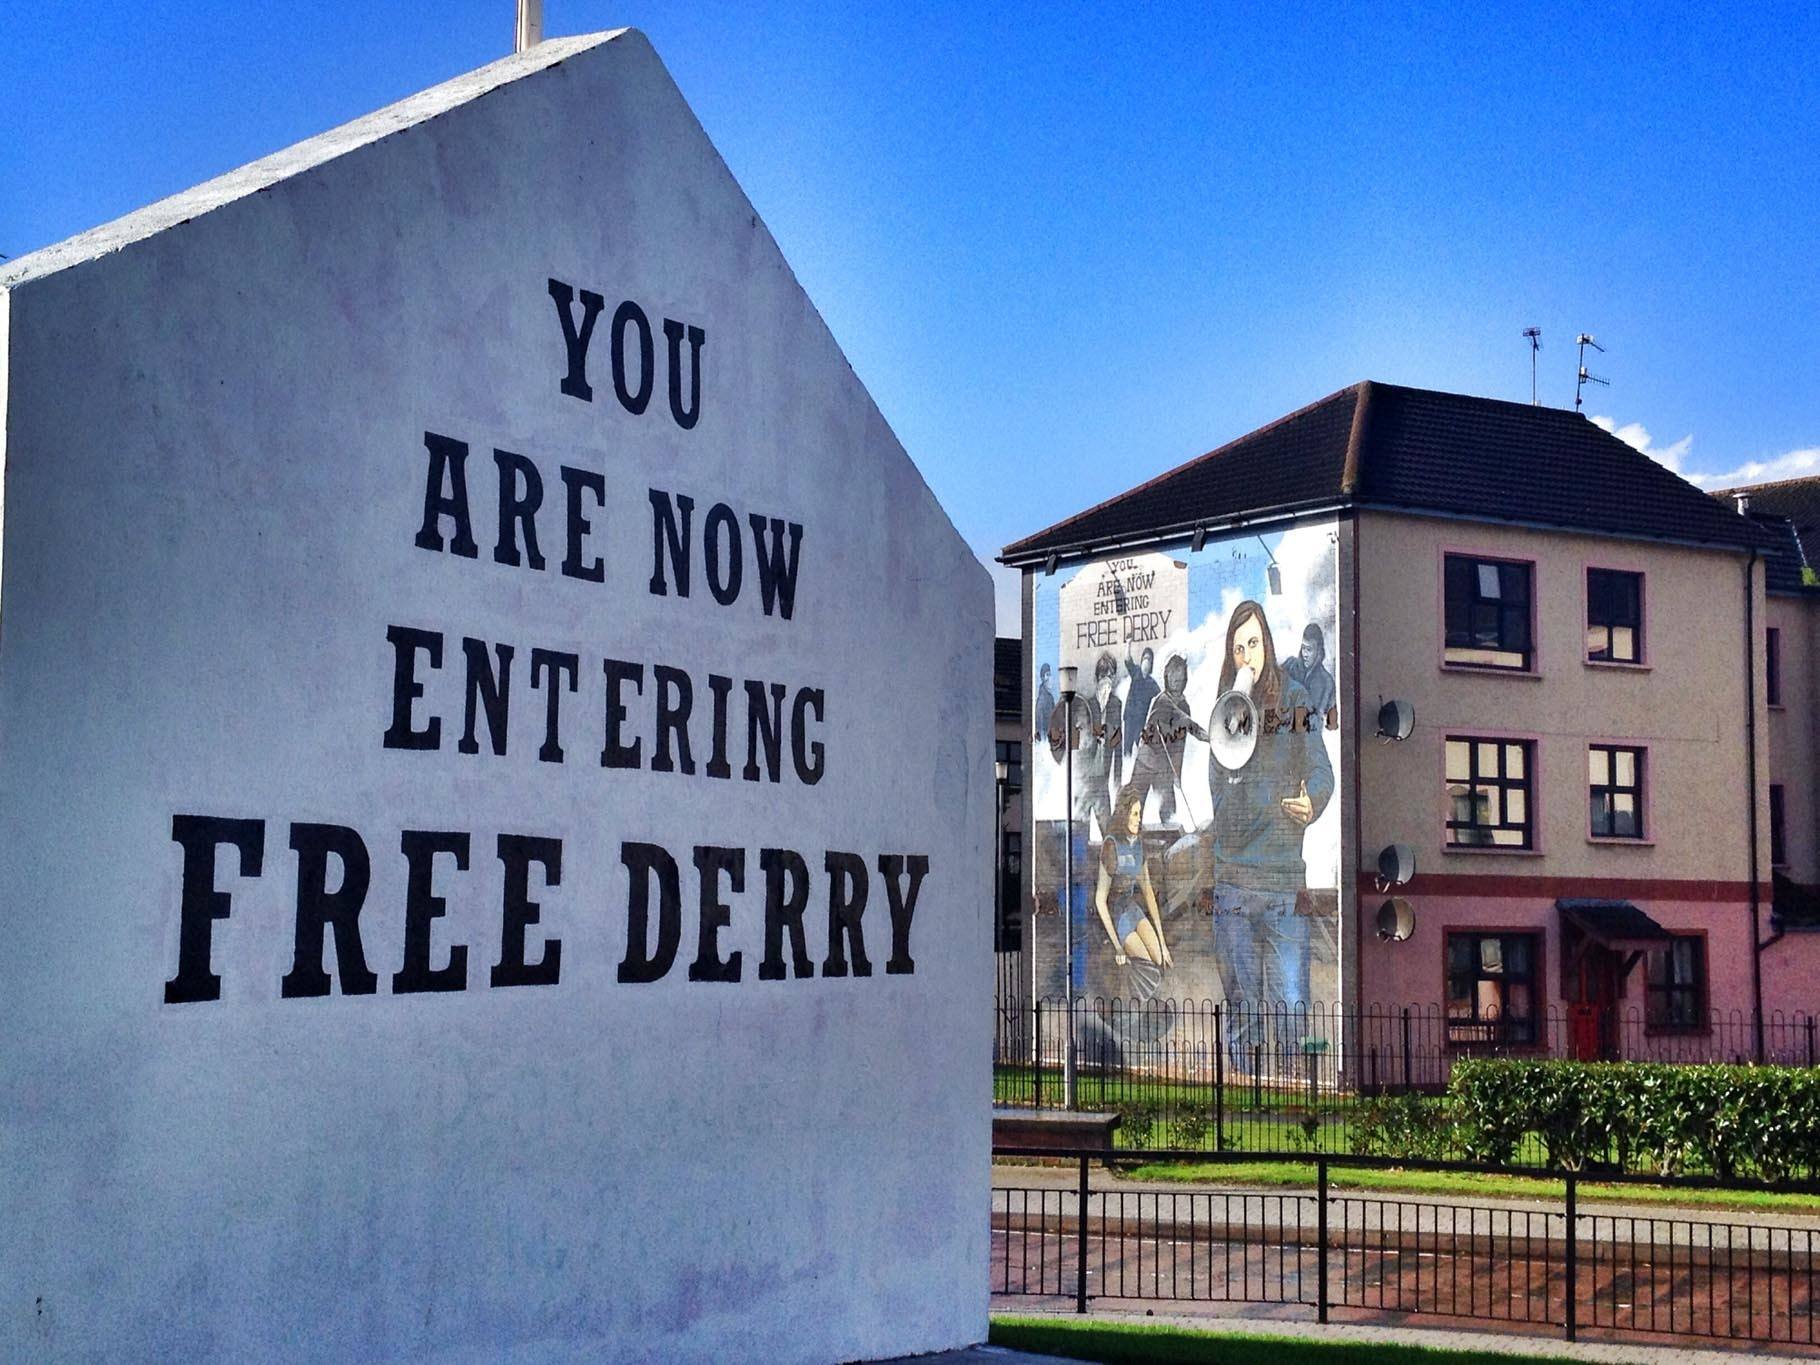 Two murals -- one that says "You Are Now Entering Free Derry" and another with a woman holding a megaphone